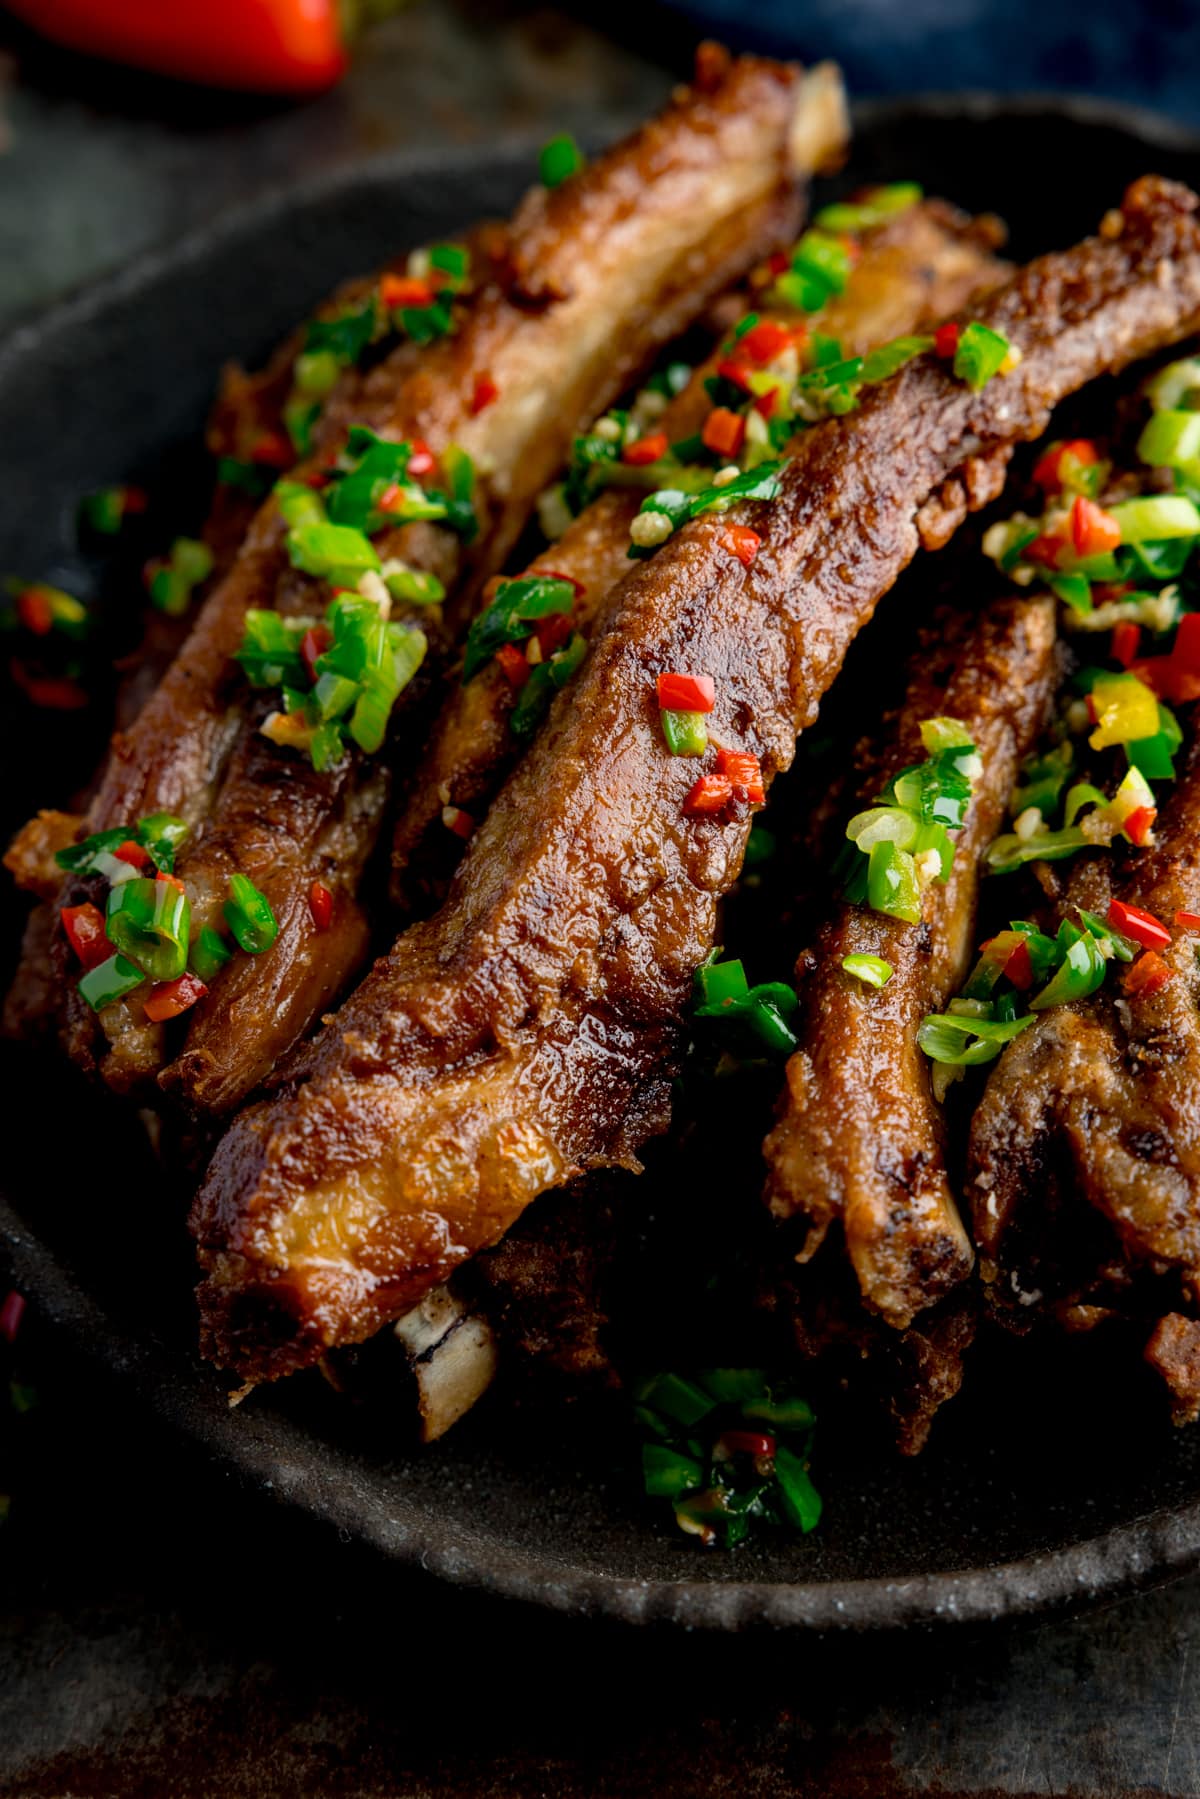 Salt and pepper pork ribs on a black plate. The ribs are topped with chopped chillies and spring onions. The plate is on a dark background. There is a red chilli pepper at the top of the frame.